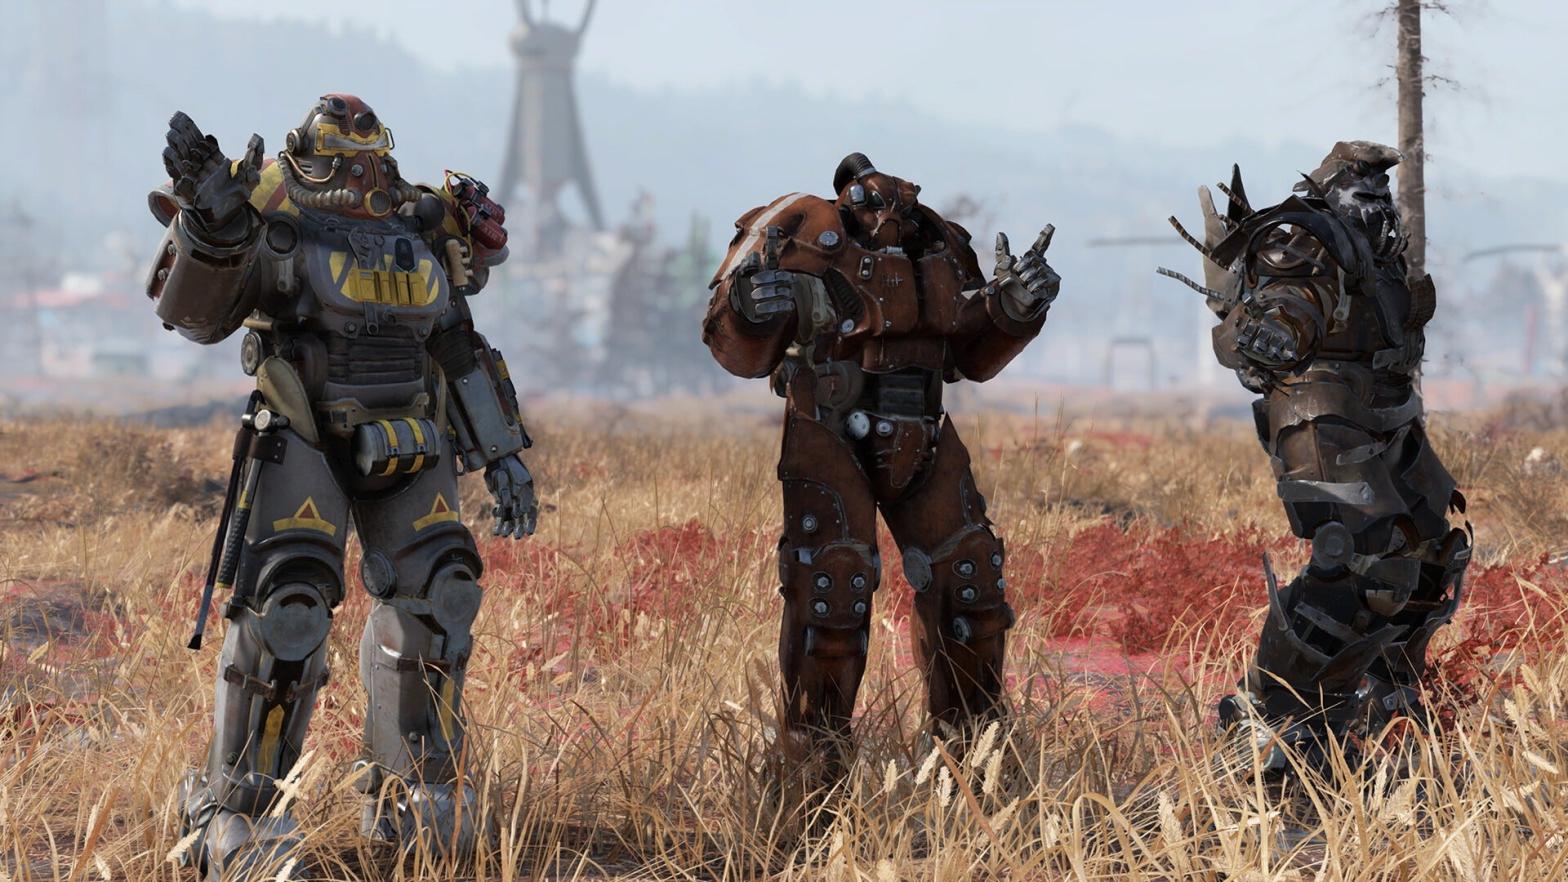 Todd Howard On Fallout 76 Crossplay And Cross-Progression